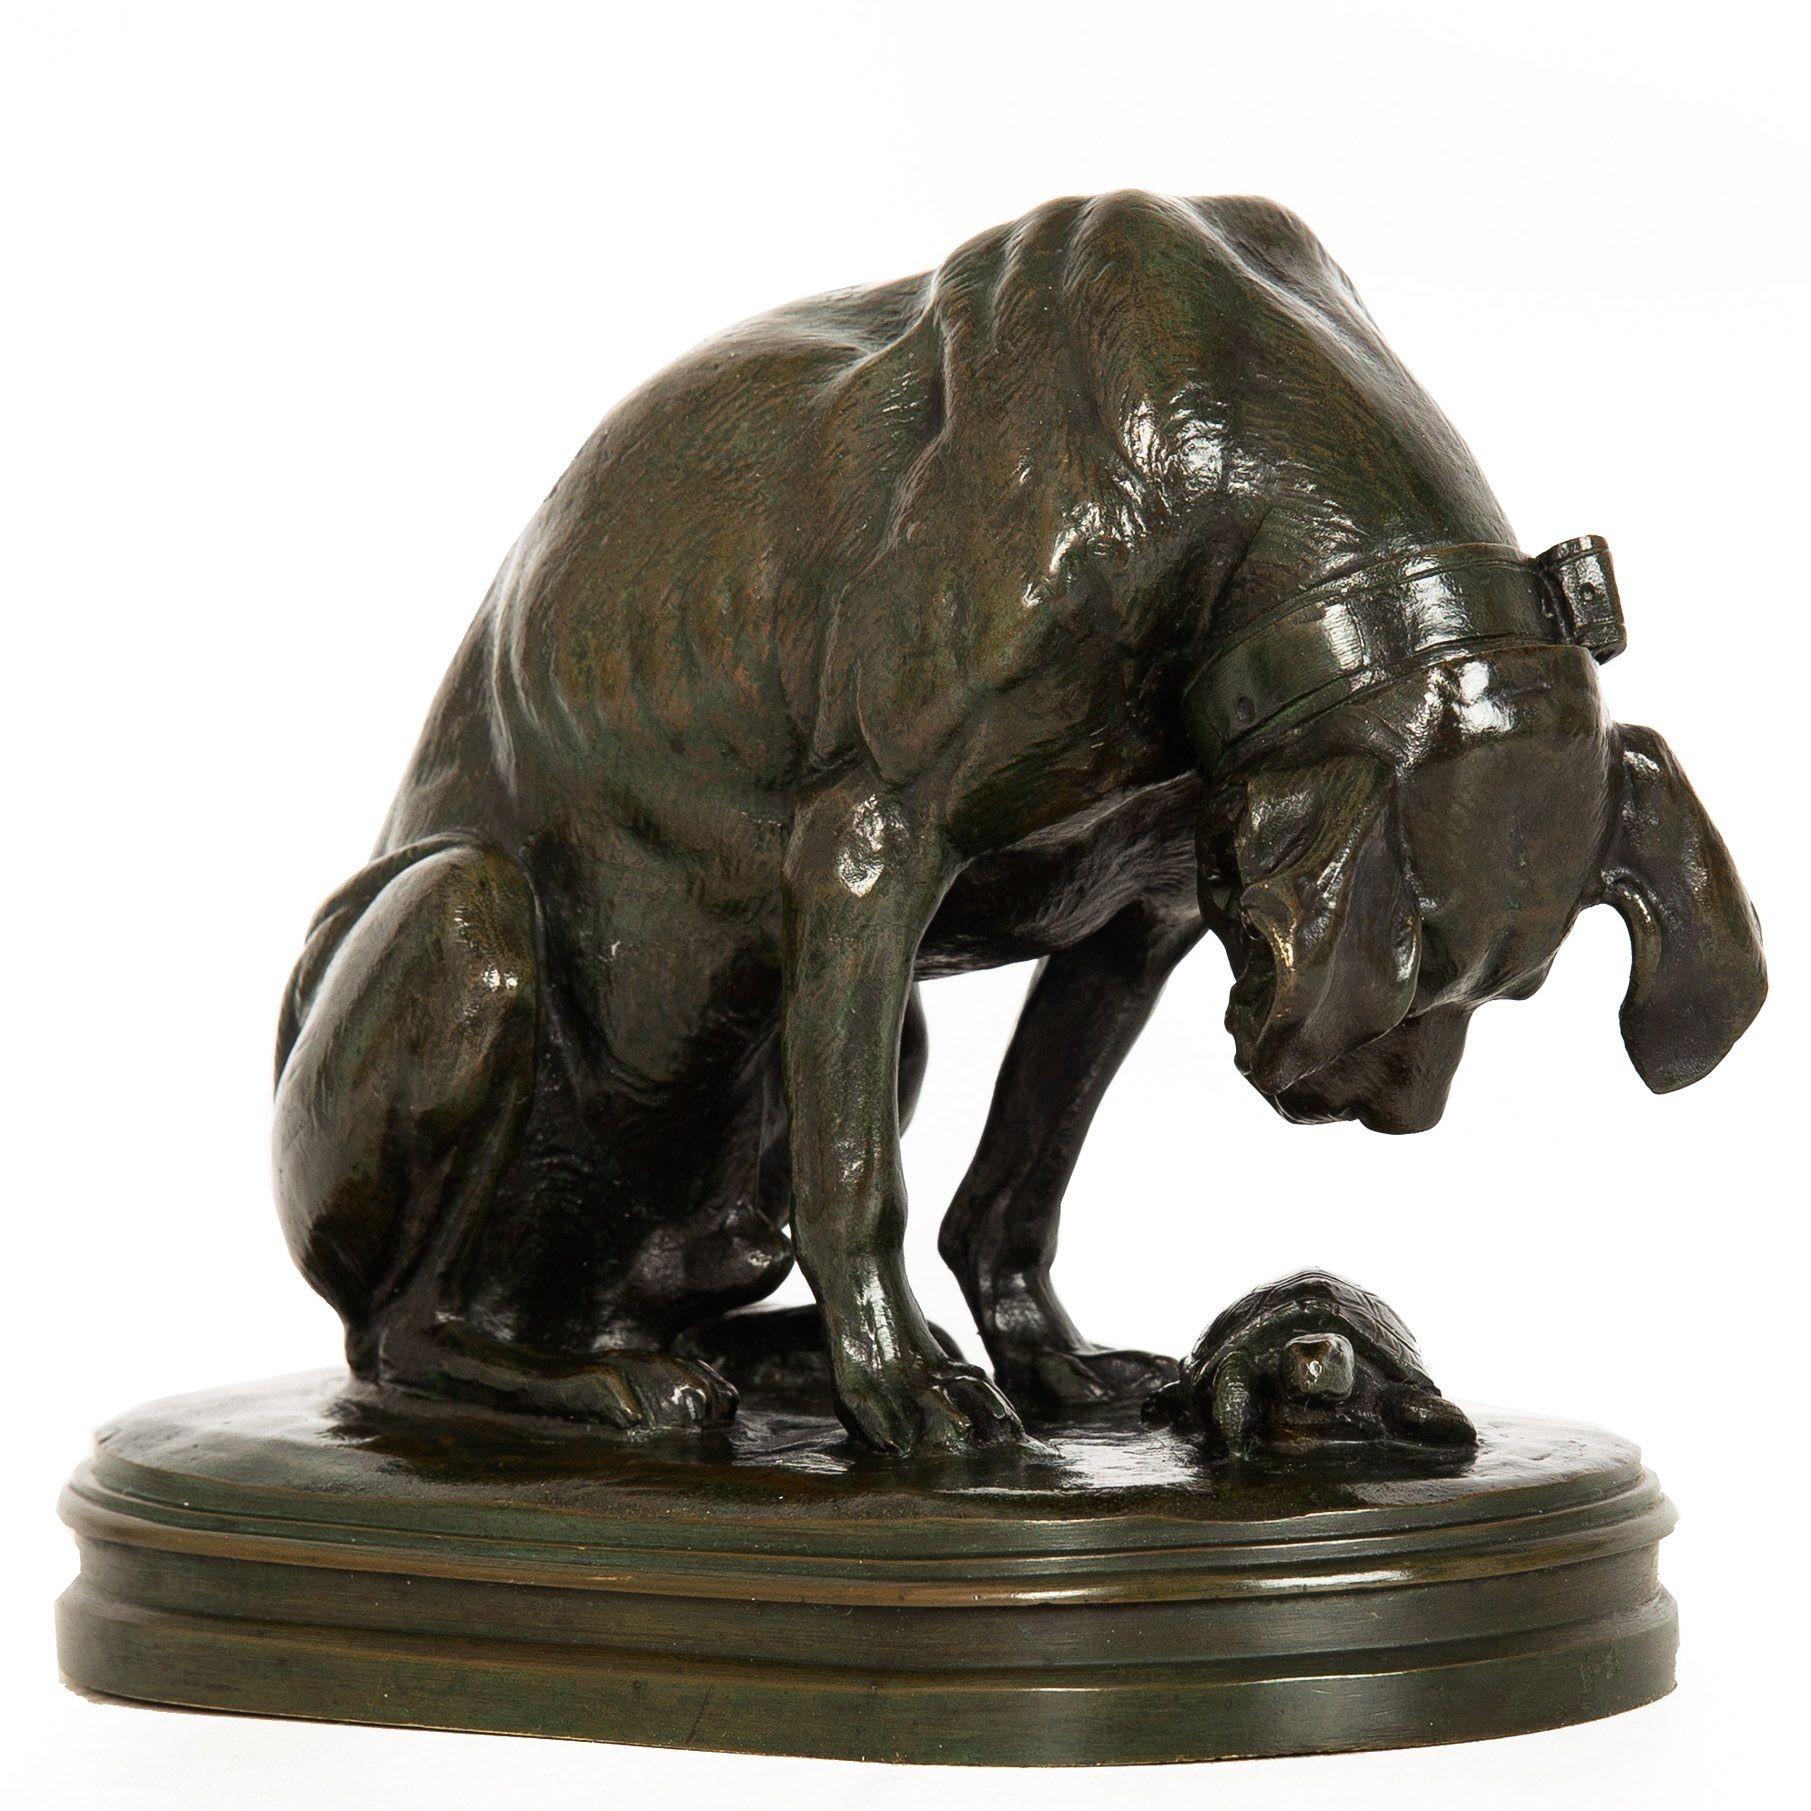 French Antique Bronze Sculpture “Hound & Tortoise” by Henri Jacquemart In Good Condition For Sale In Shippensburg, PA